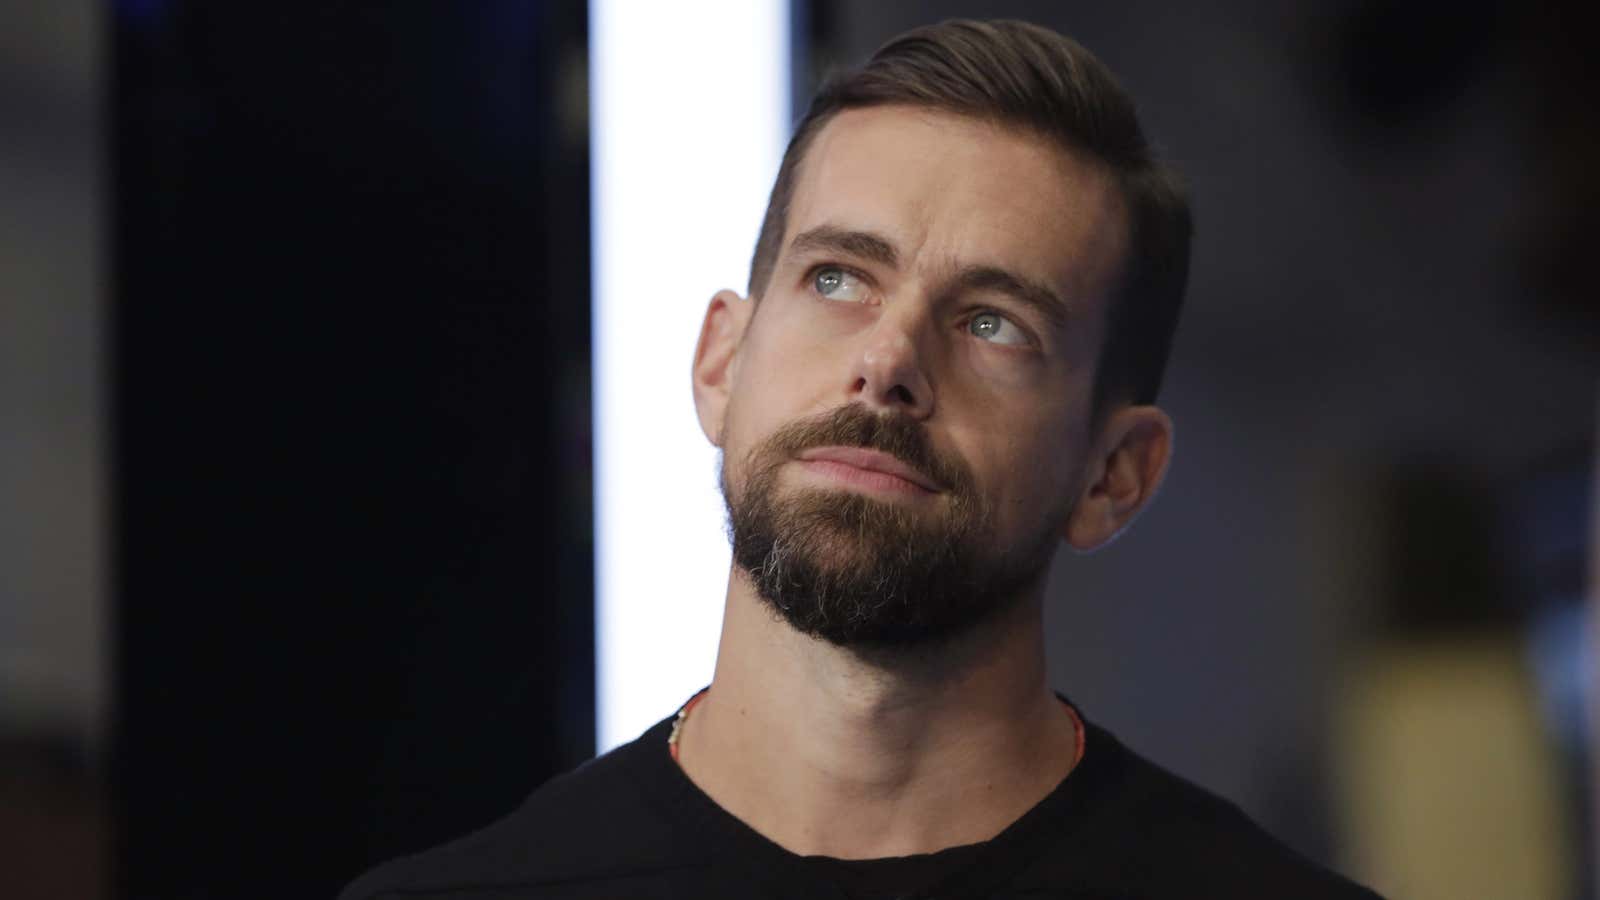 Square CEO Jack Dorsey believes in bitcoin.